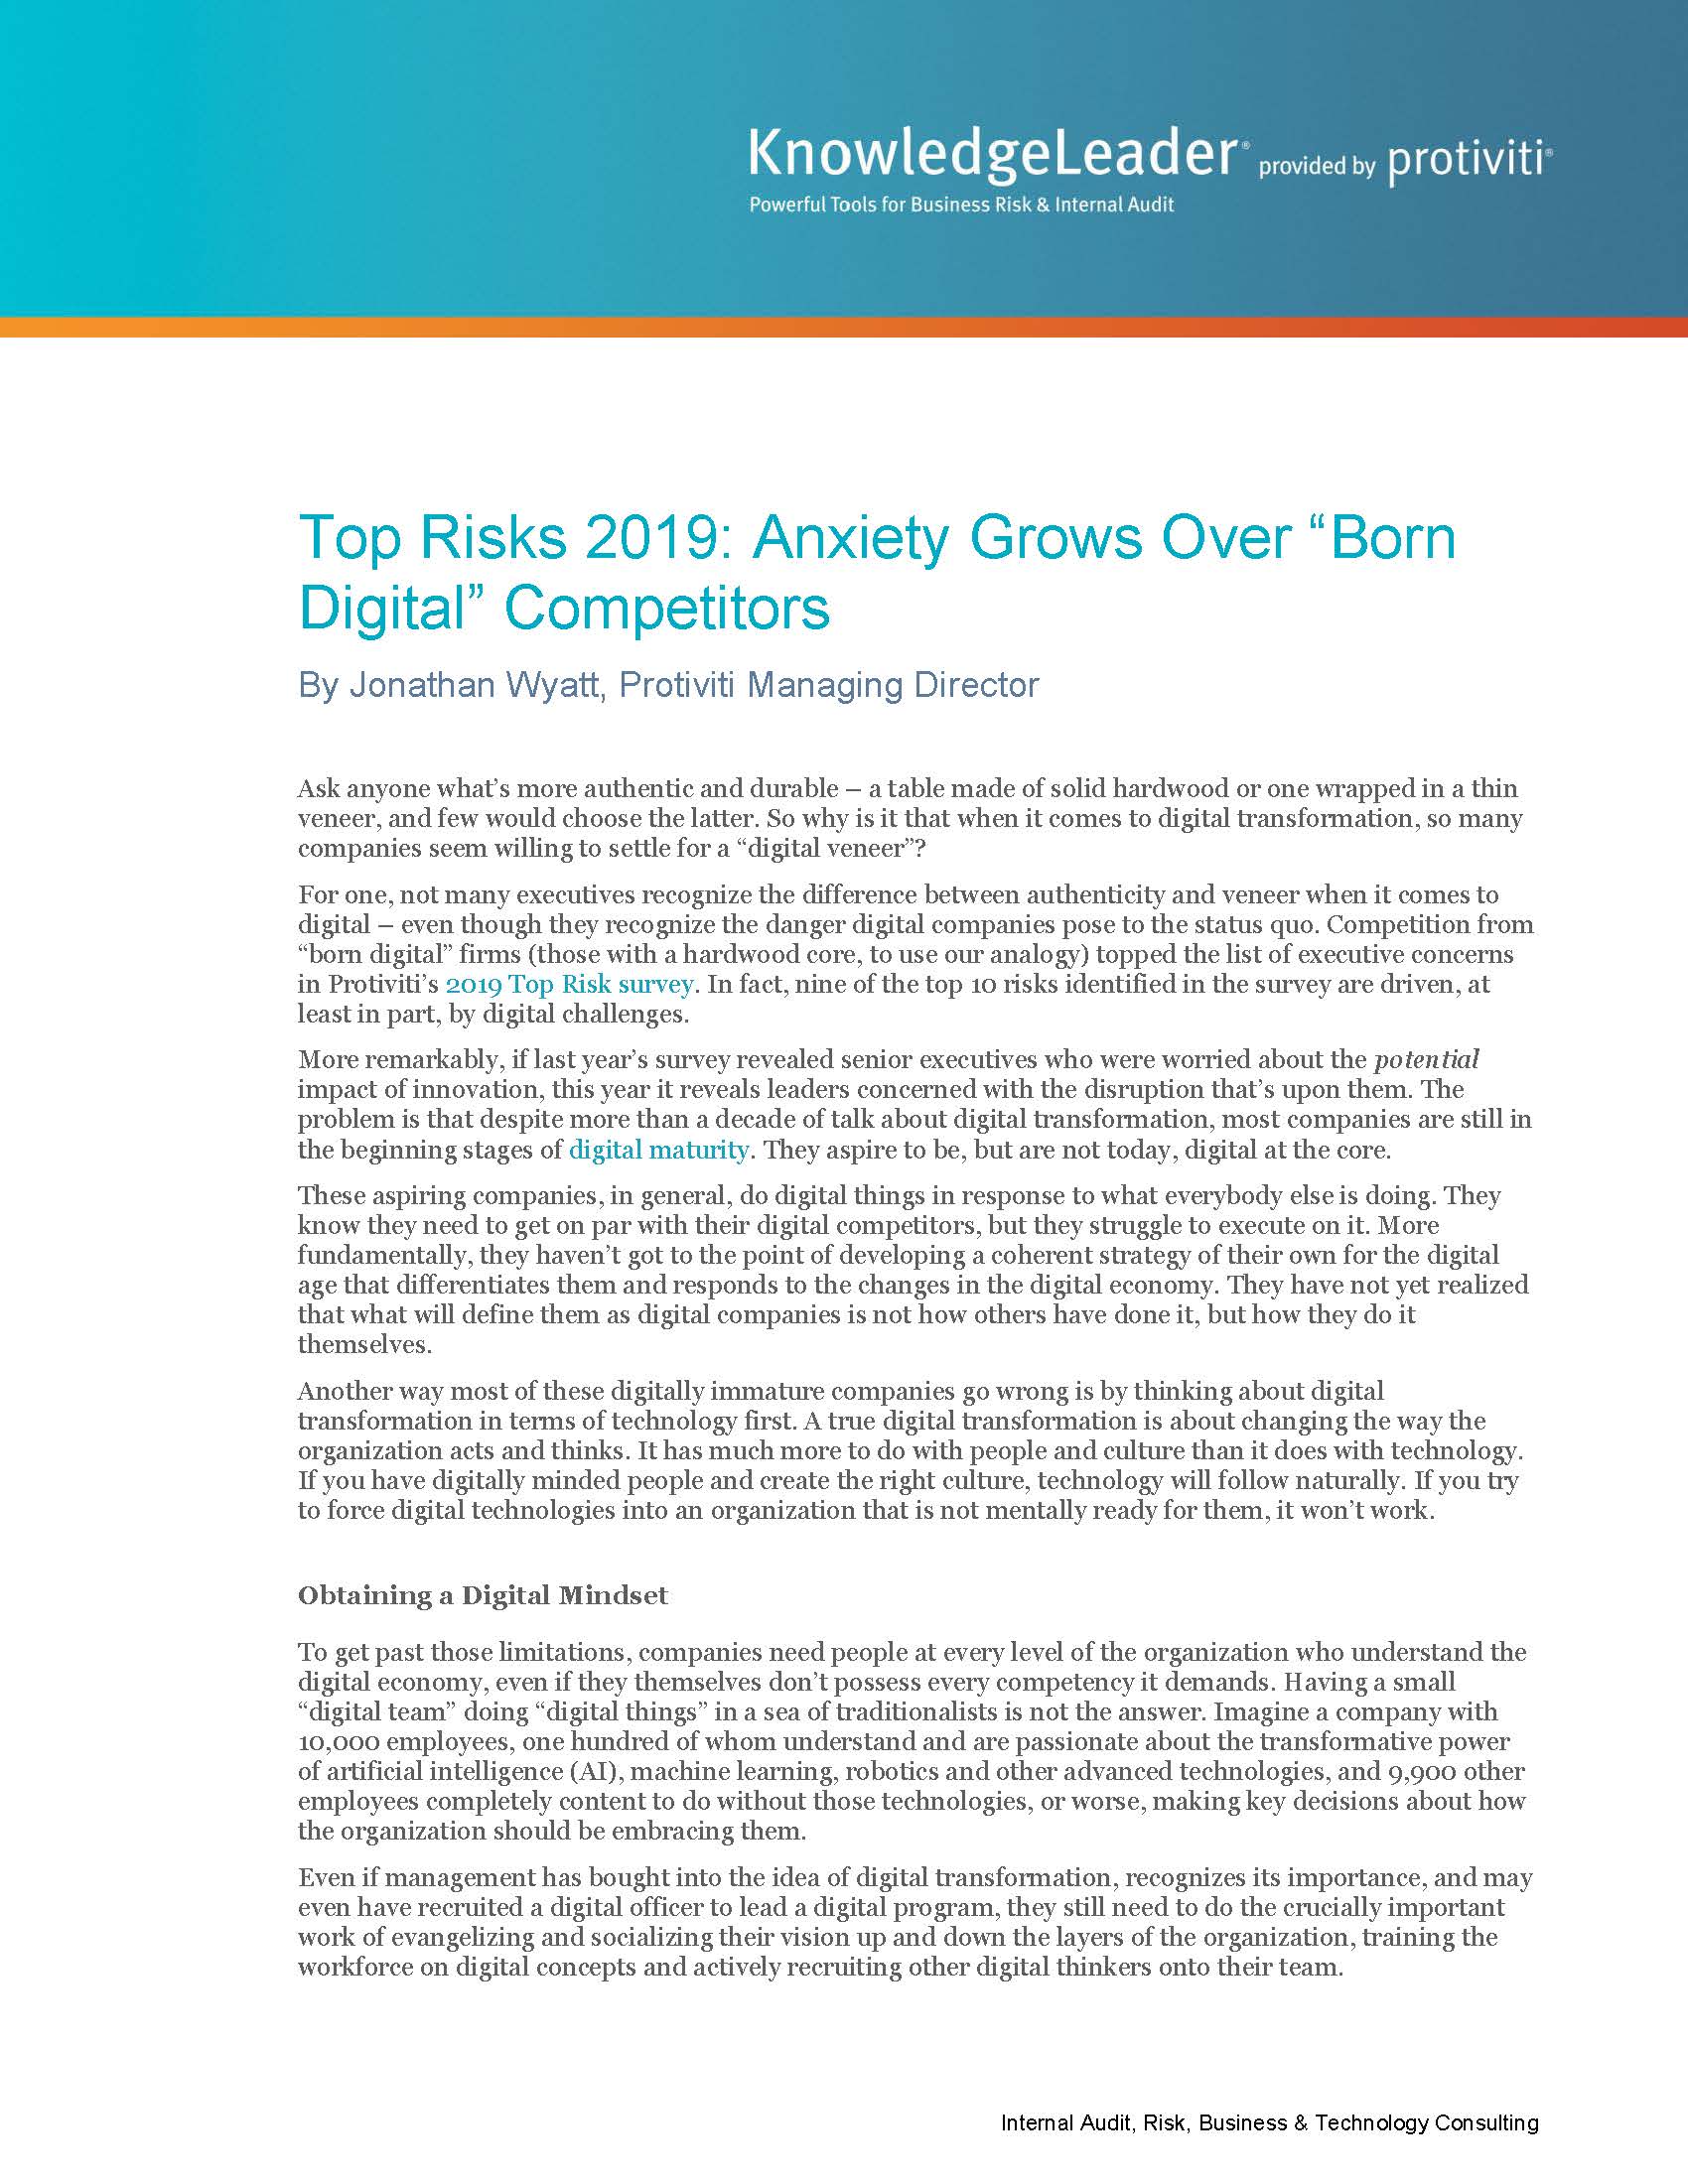 Screenshot of the first page of Top Risks 2019 Anxiety Grows Over ‘‘Born Digital’’ Competitors